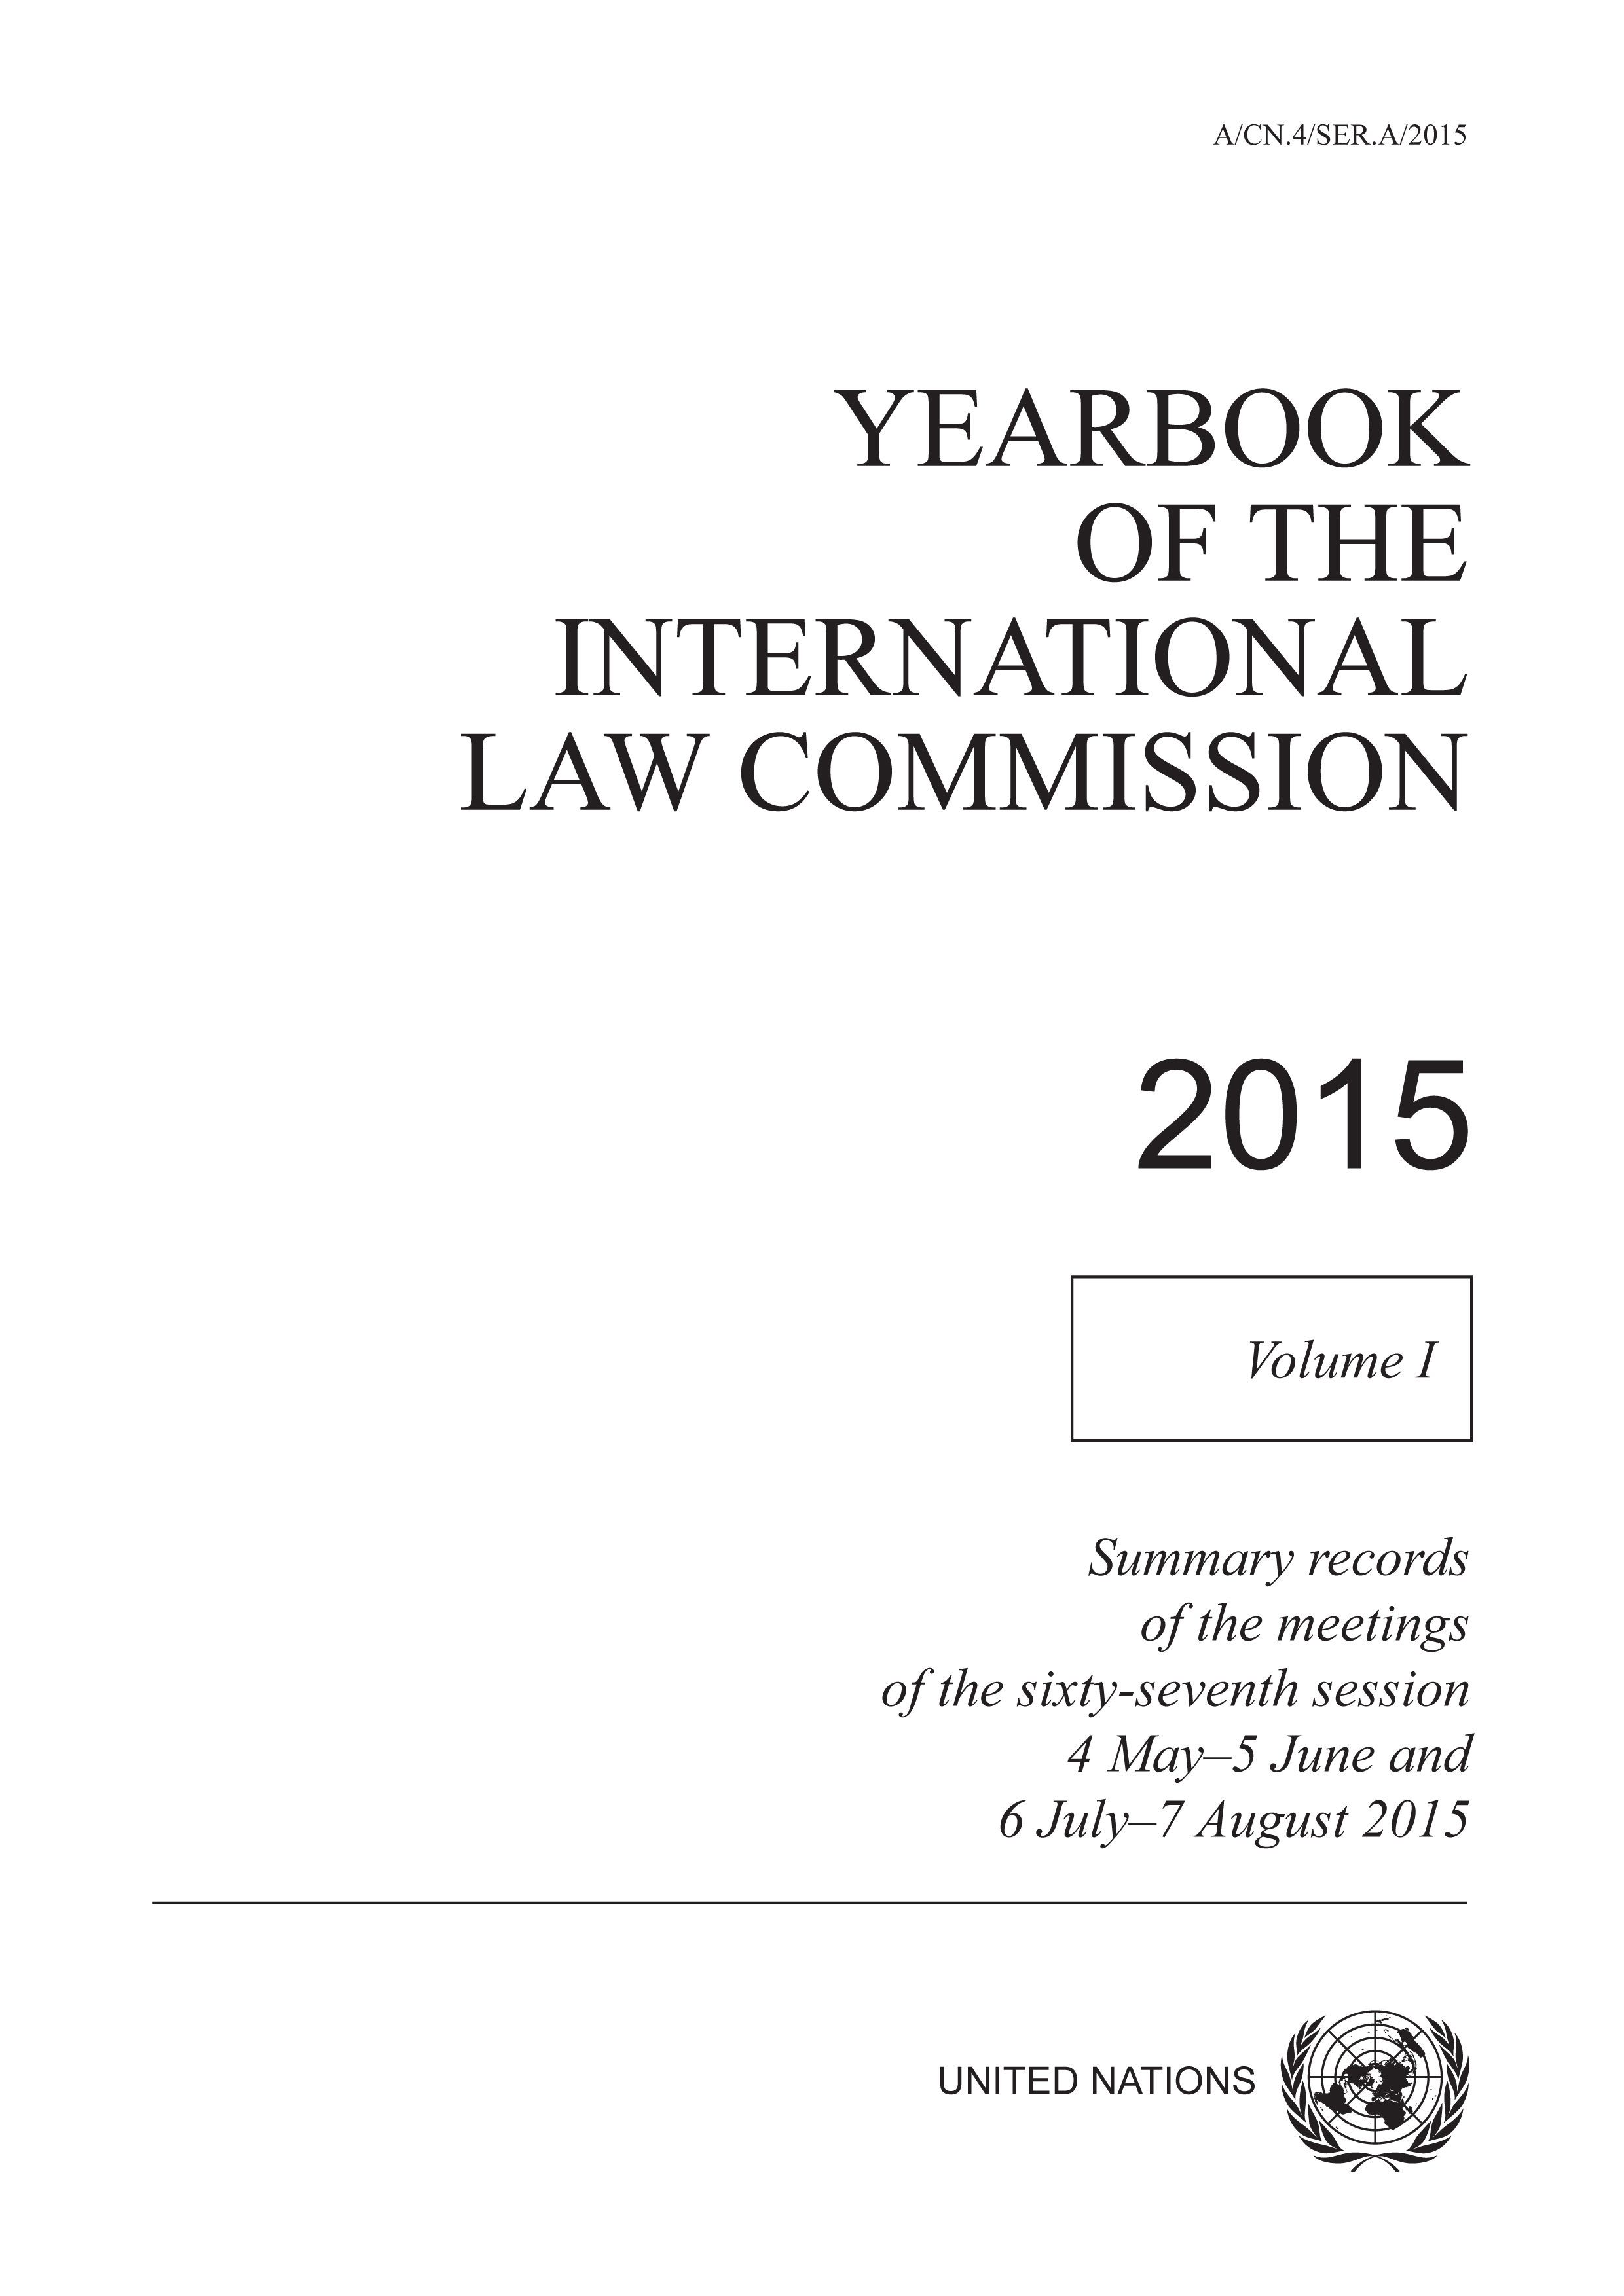 image of Yearbook of the International Law Commission 2015, Vol. I